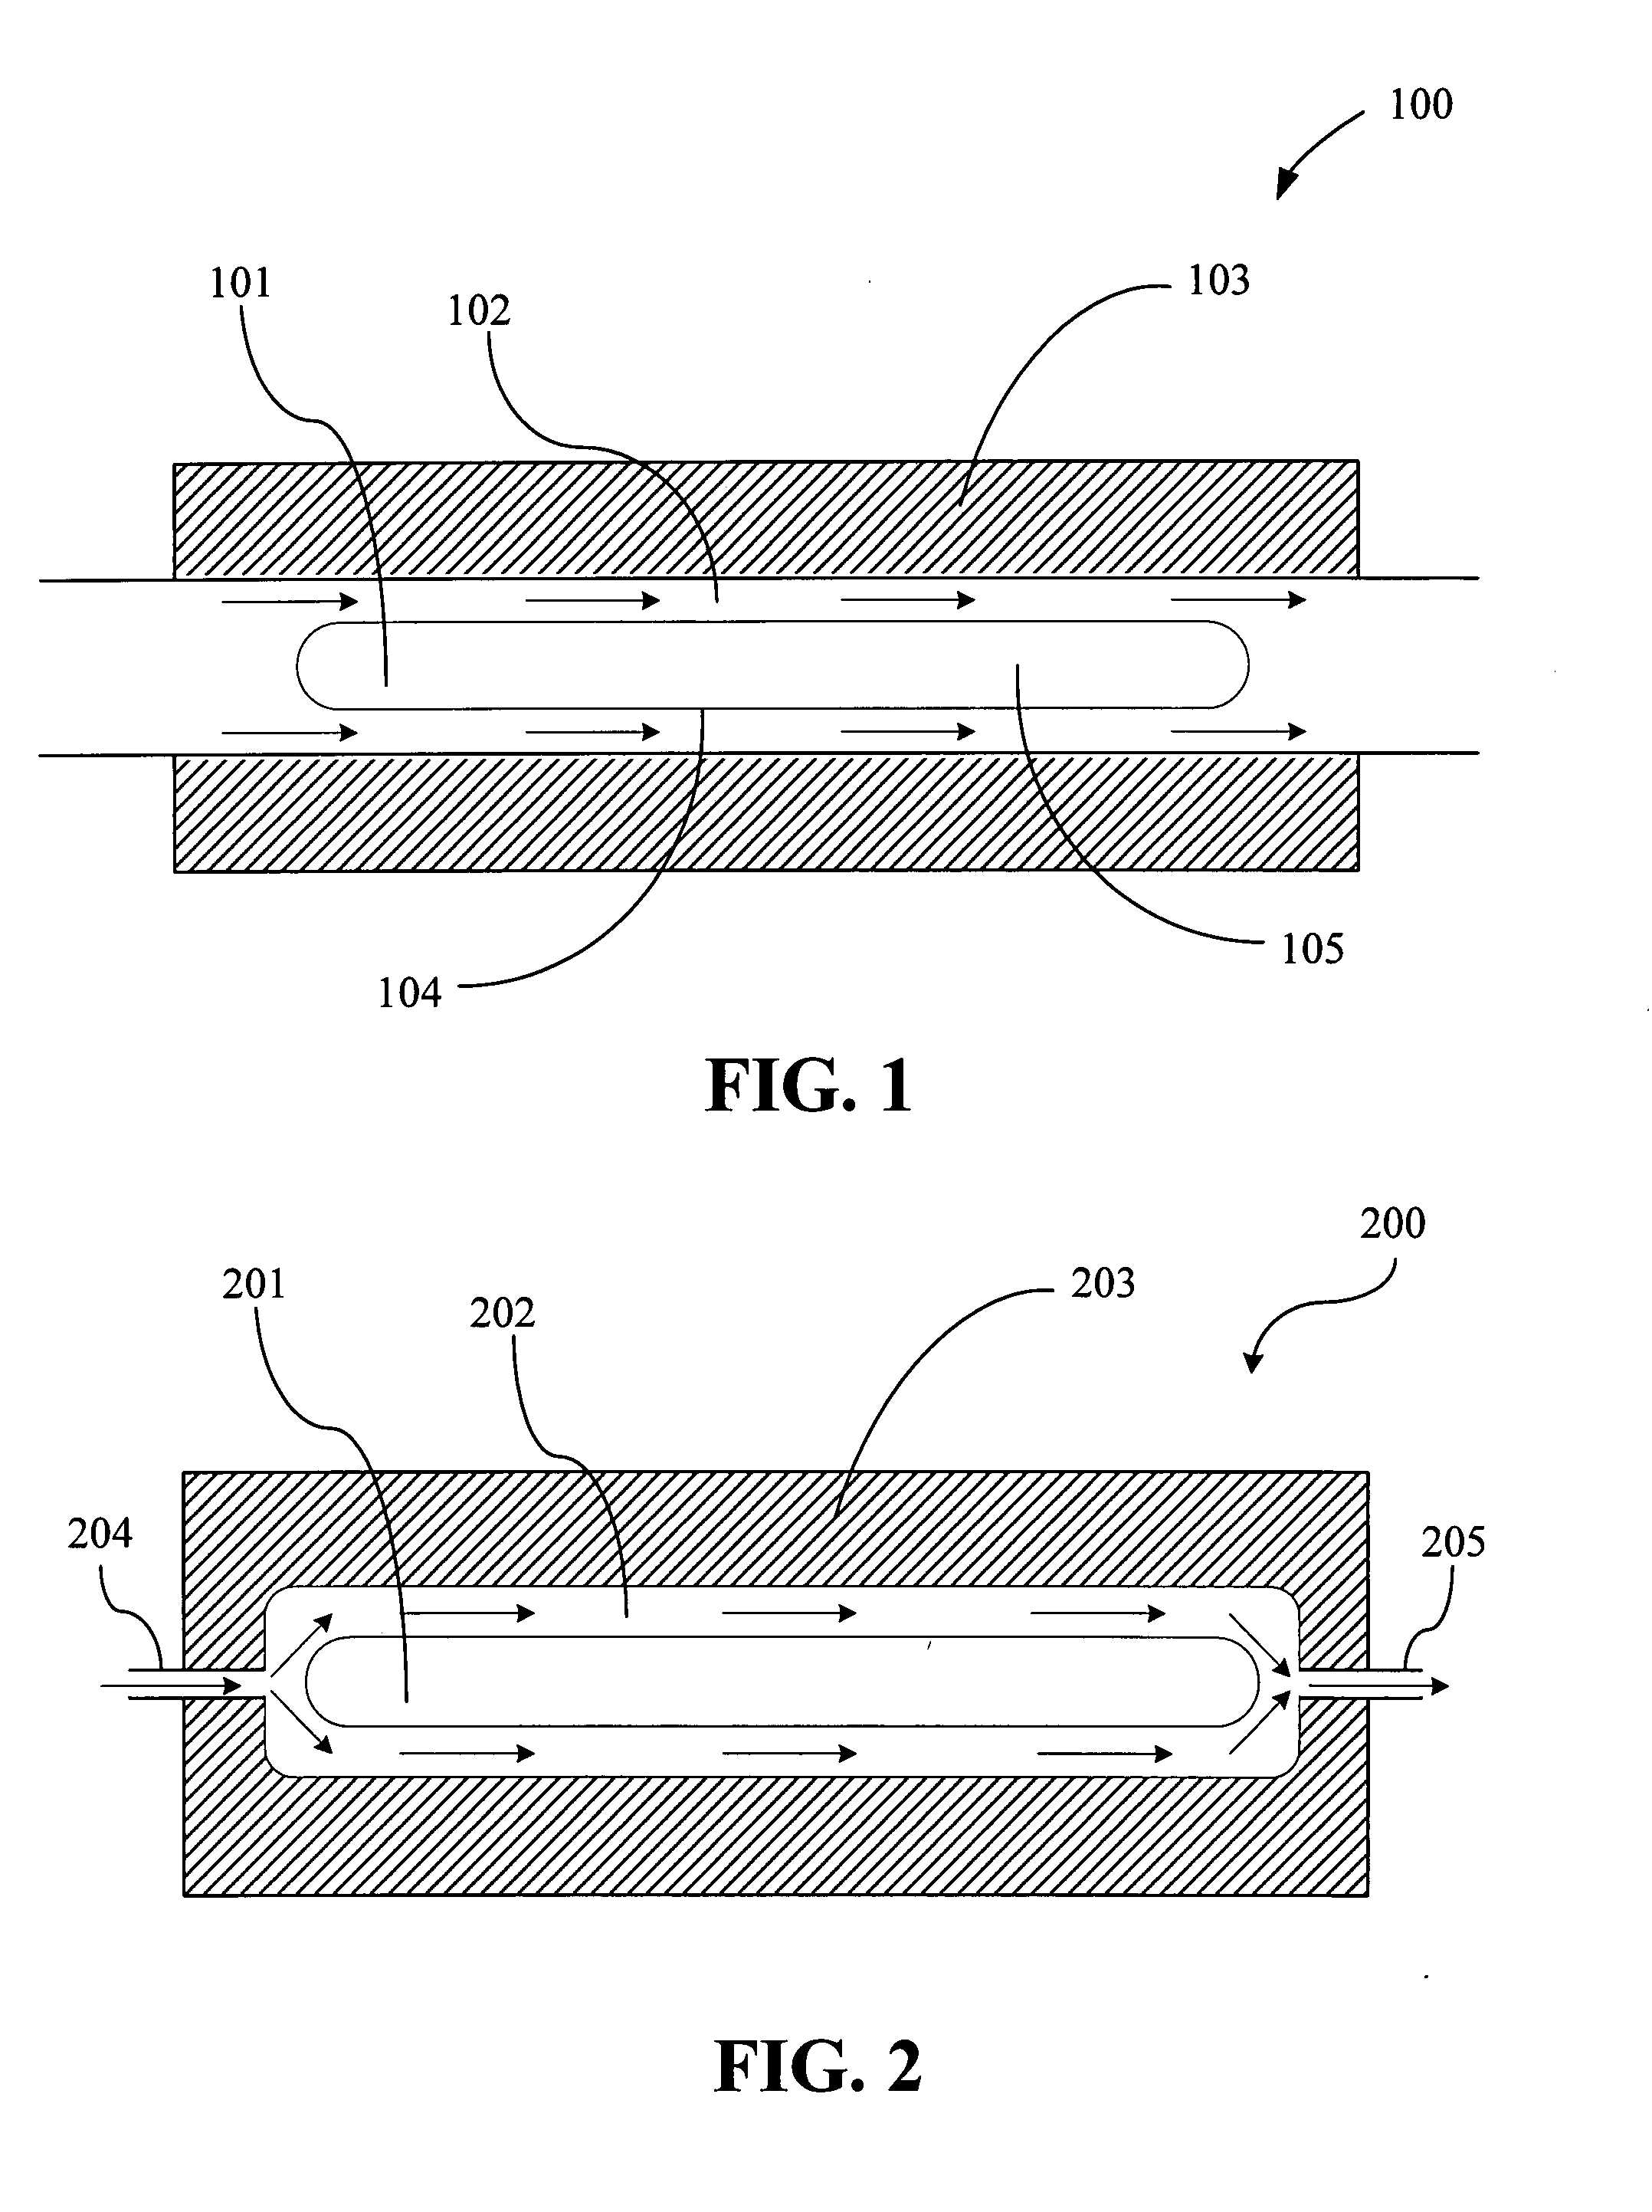 Method and apparatus for treating materials using electrodeless lamps